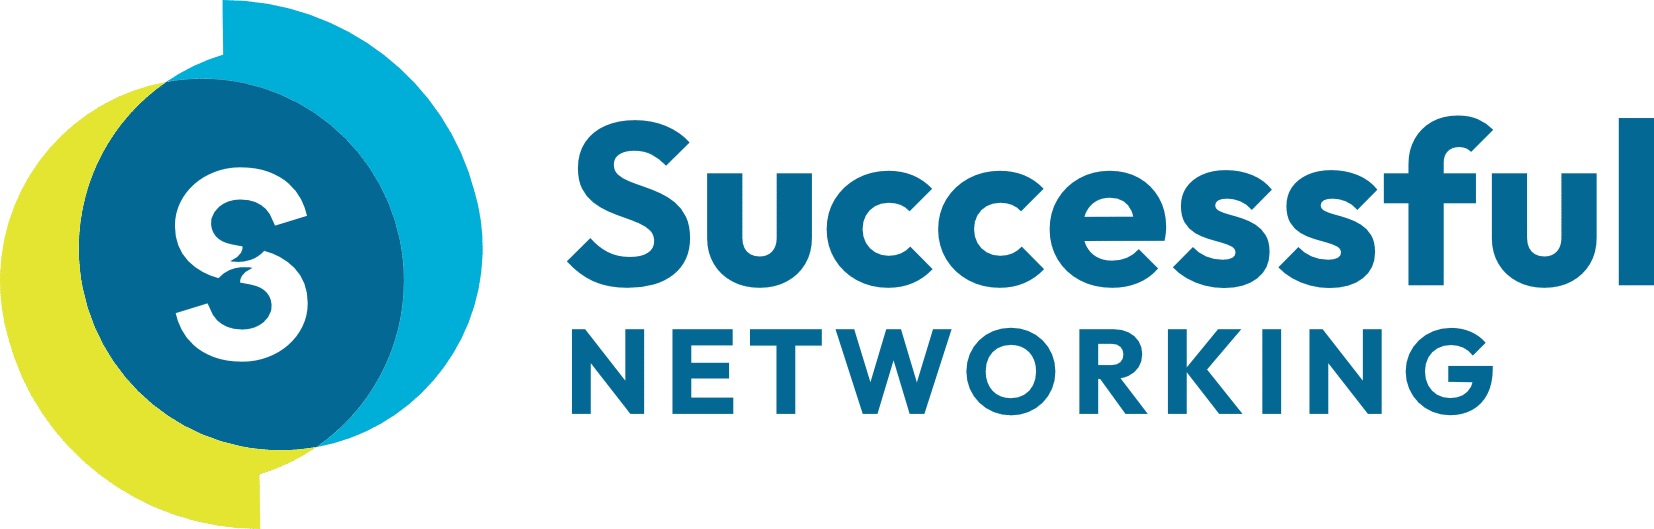 Successful Networking - New Zealand